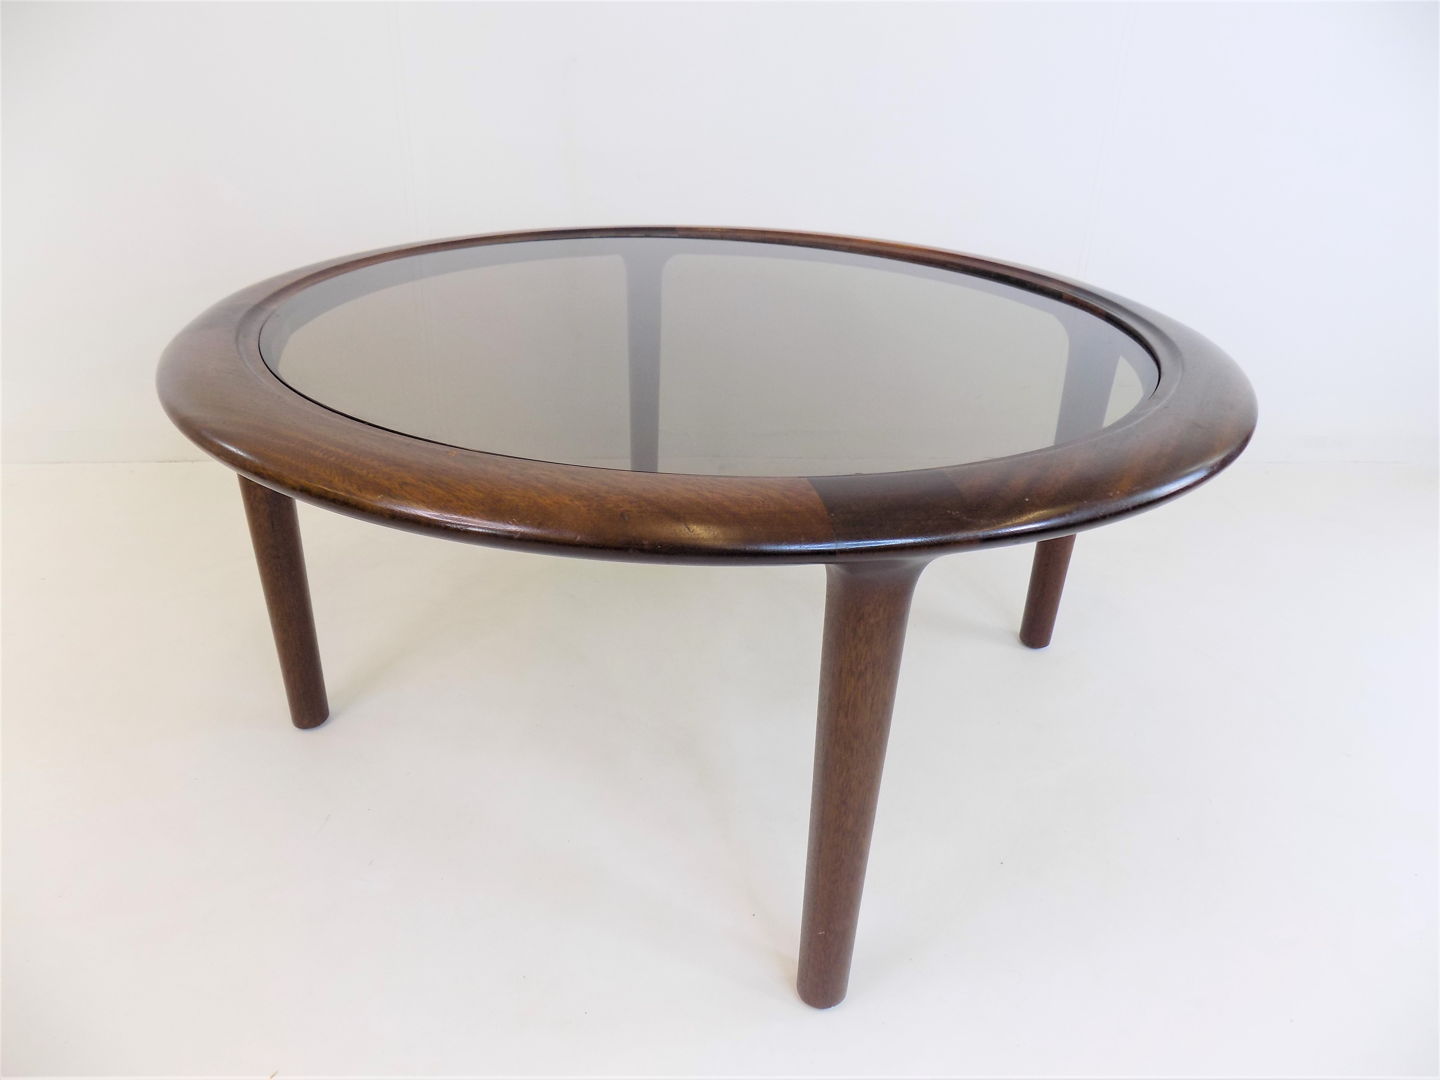 Collection Terra wood/glass coffee table